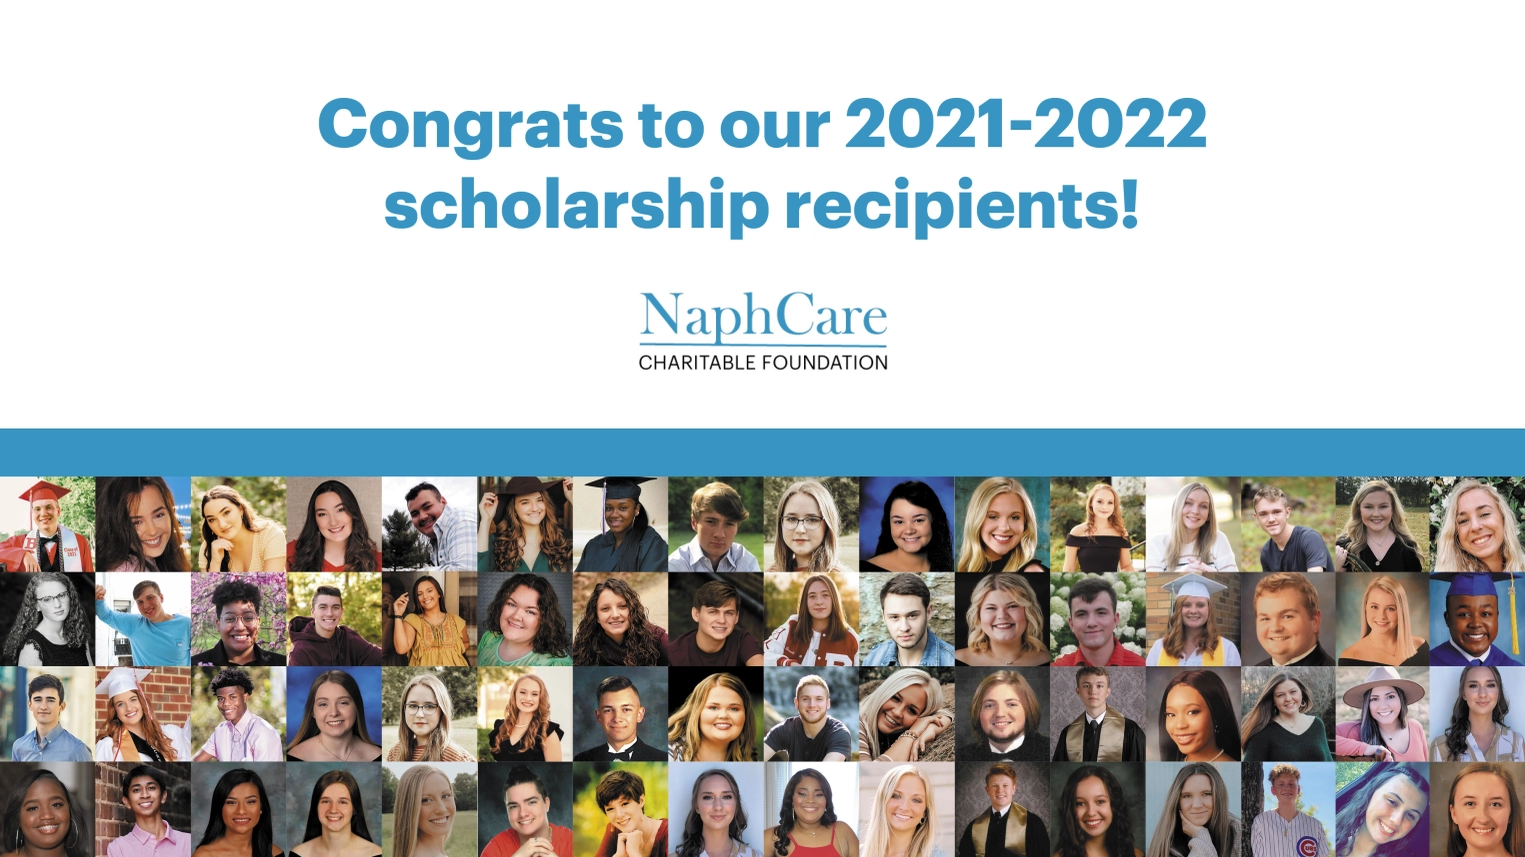 Recipients of the 2021 NaphCare Charitable Foundation Scholarship